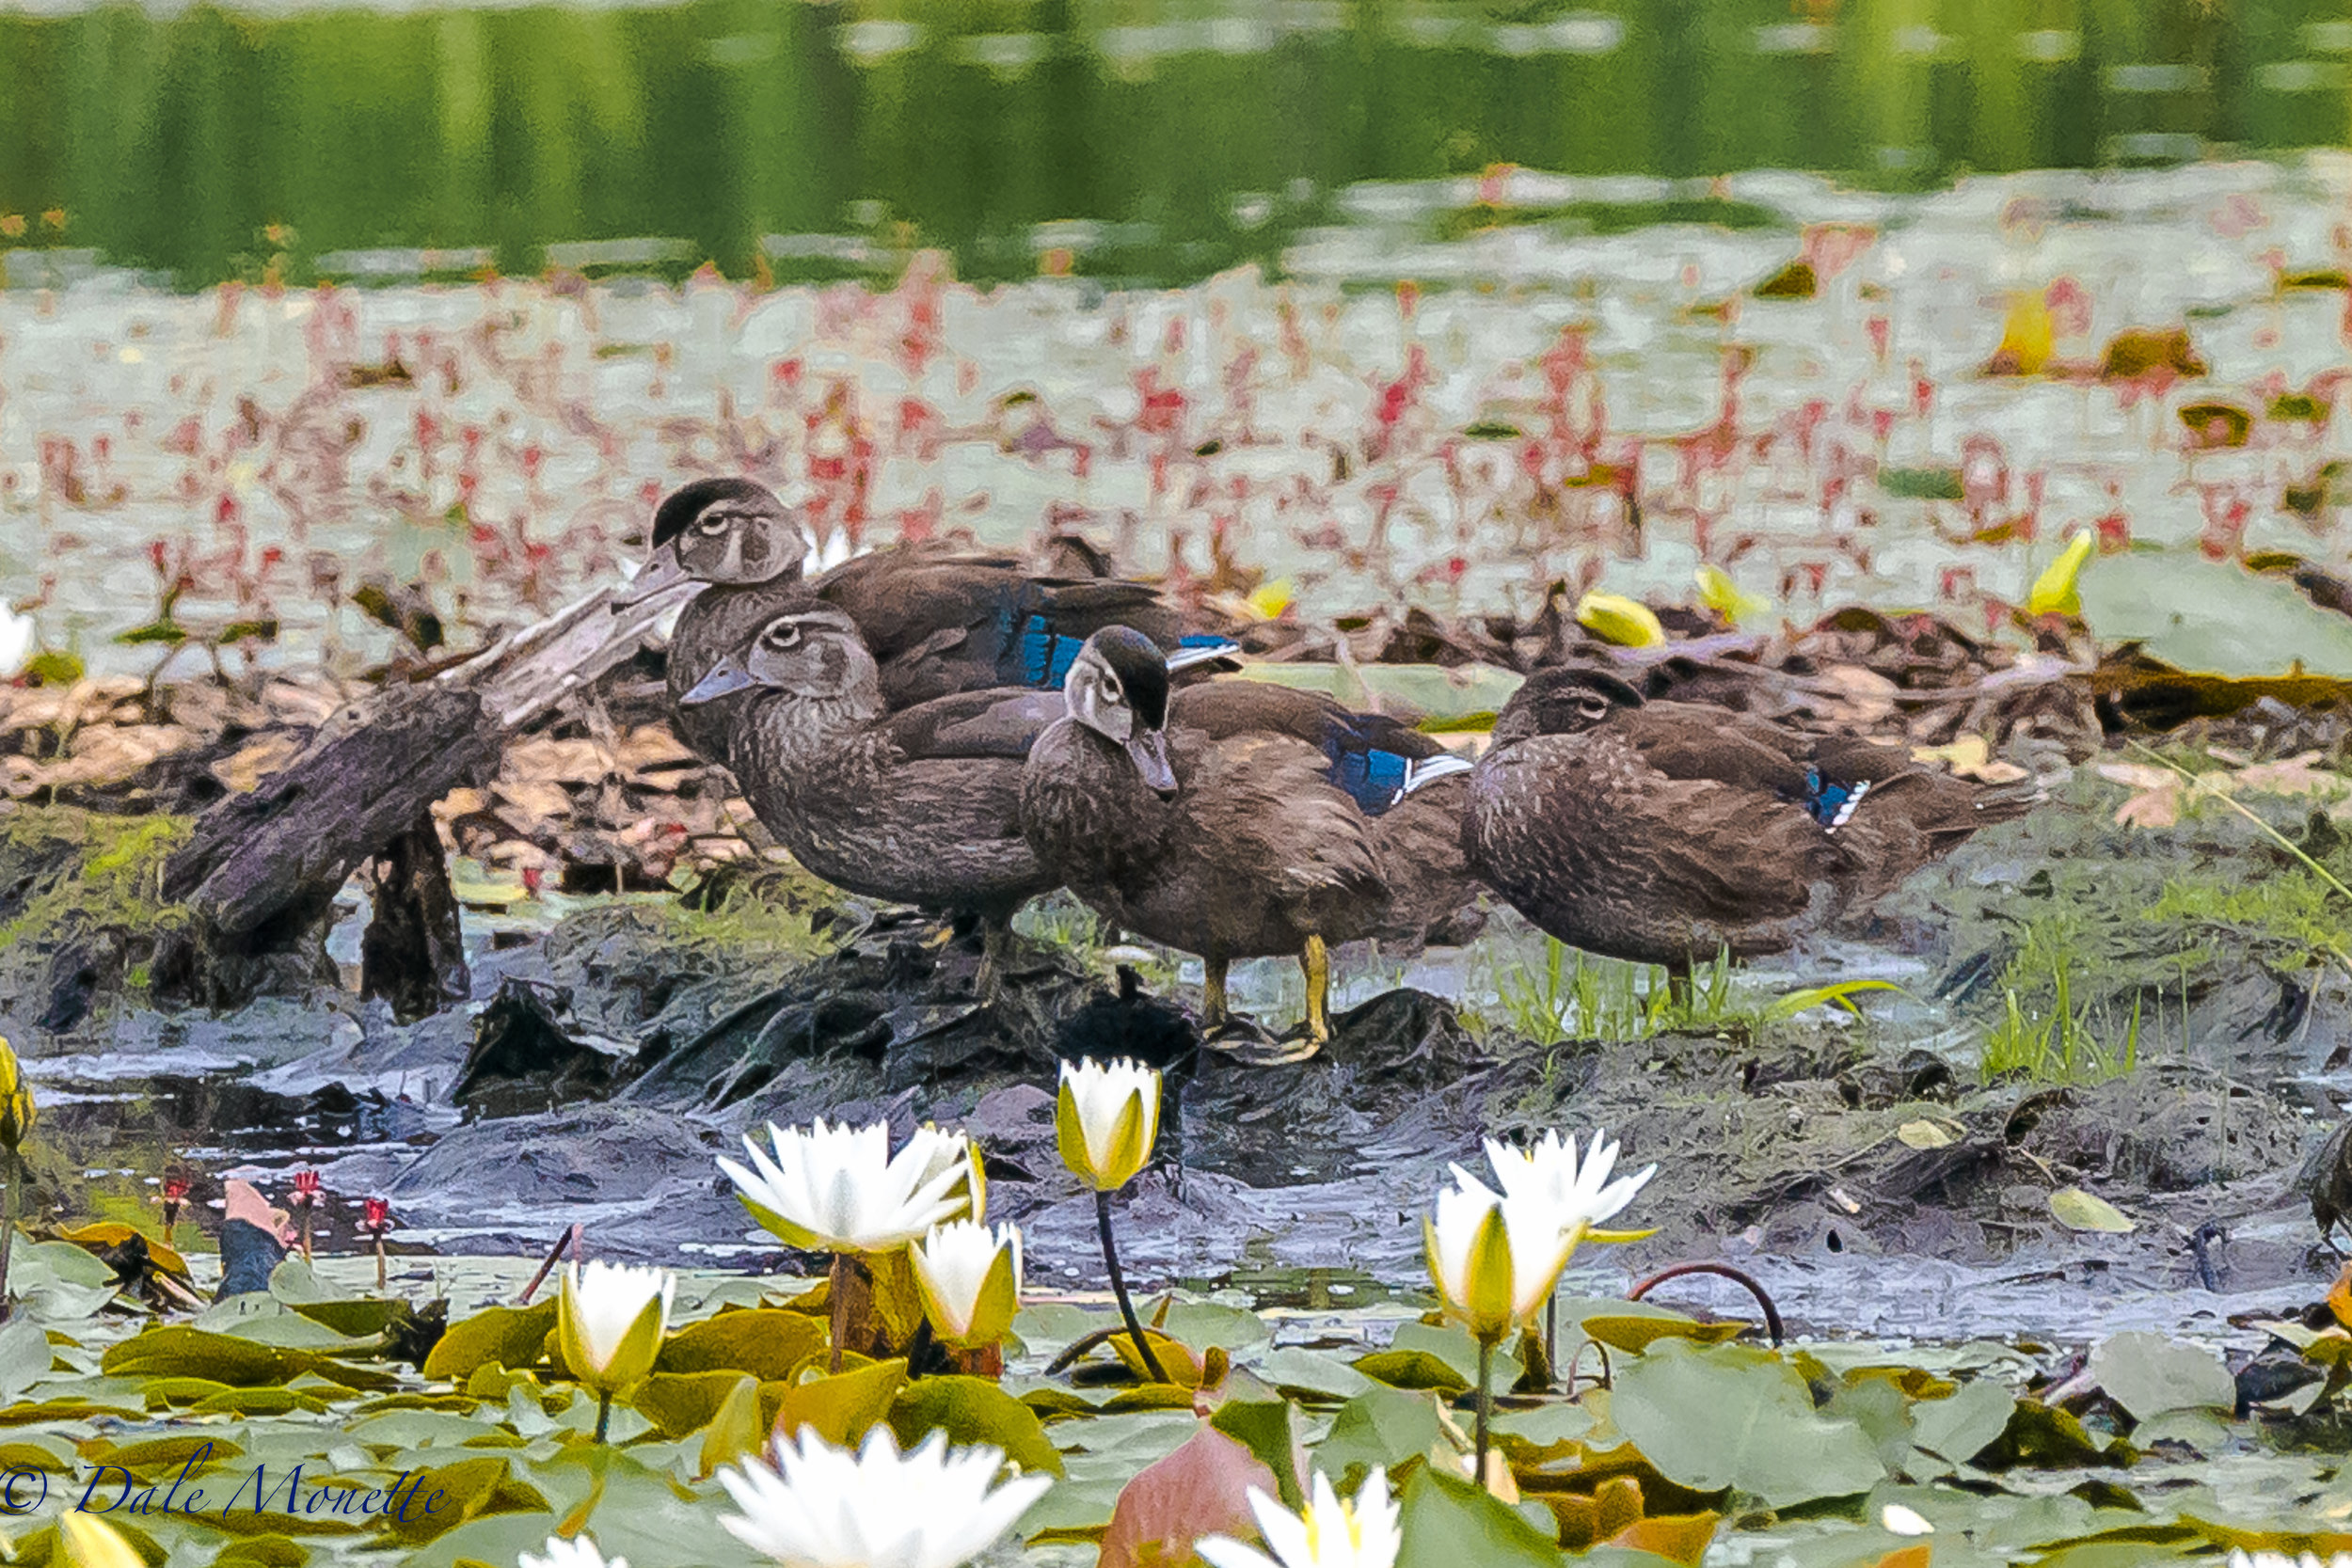   In my opinion so far this years been a banner year for wood duck chicks. &nbsp;Right now the beaver ponds are crawling with them getting ready to fly off into their future. &nbsp;This morning I watched these 4 preening together on "the preening stu